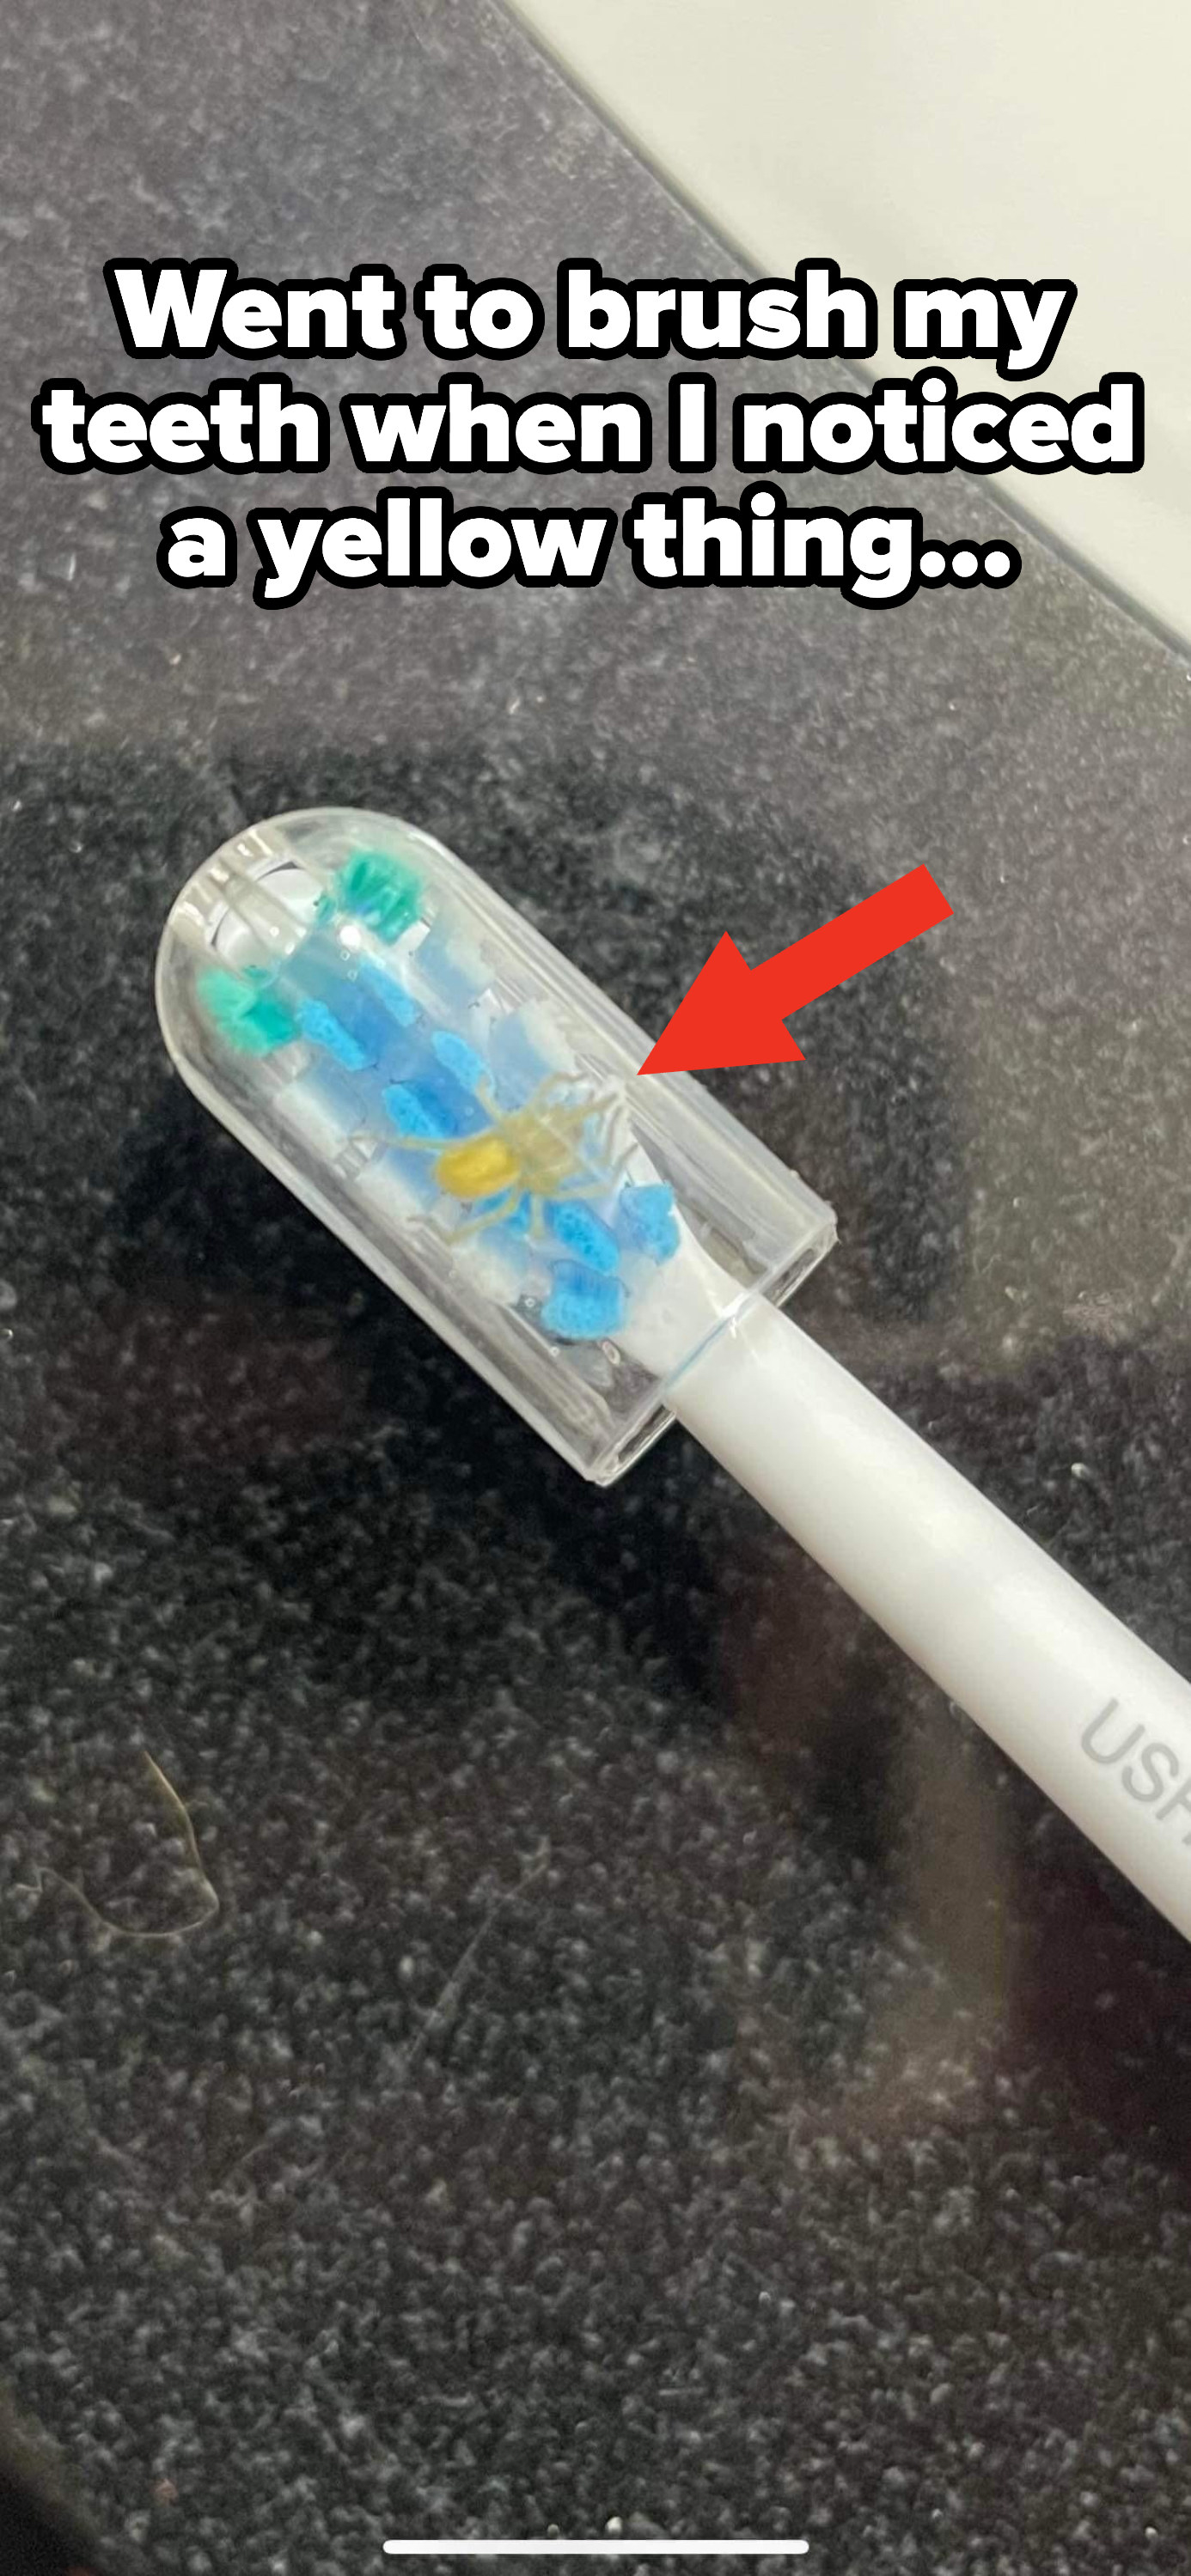 A small yellow spider inside their toothbrush cover